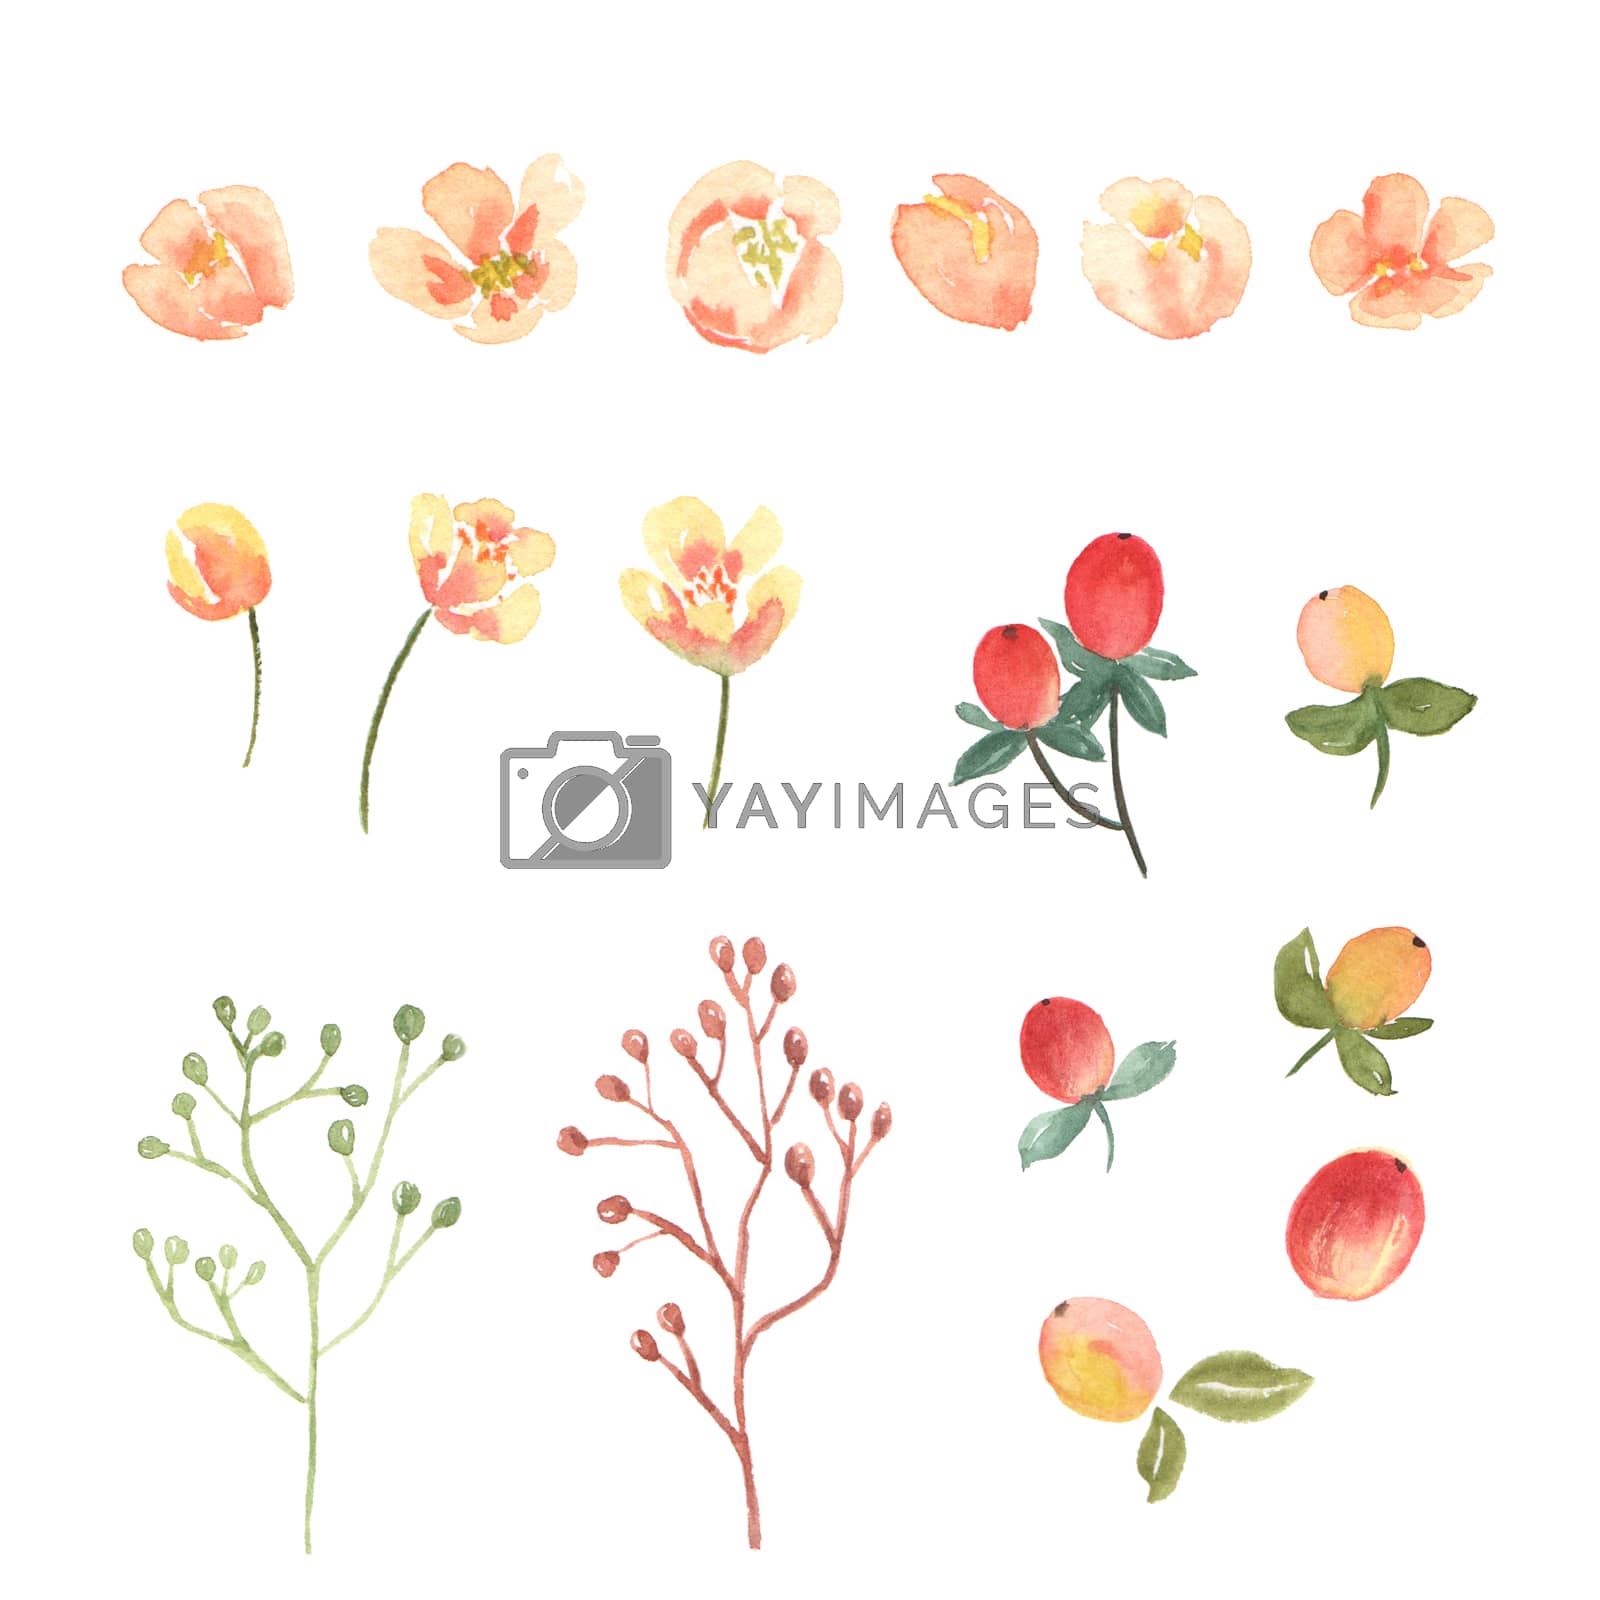 Royalty free image of Floral and leaves watercolor elements set hand painted lush flowers. Illustration of rose, peony, little flowers vintage style aquarelle isolated on white background. by 3dcr3at3